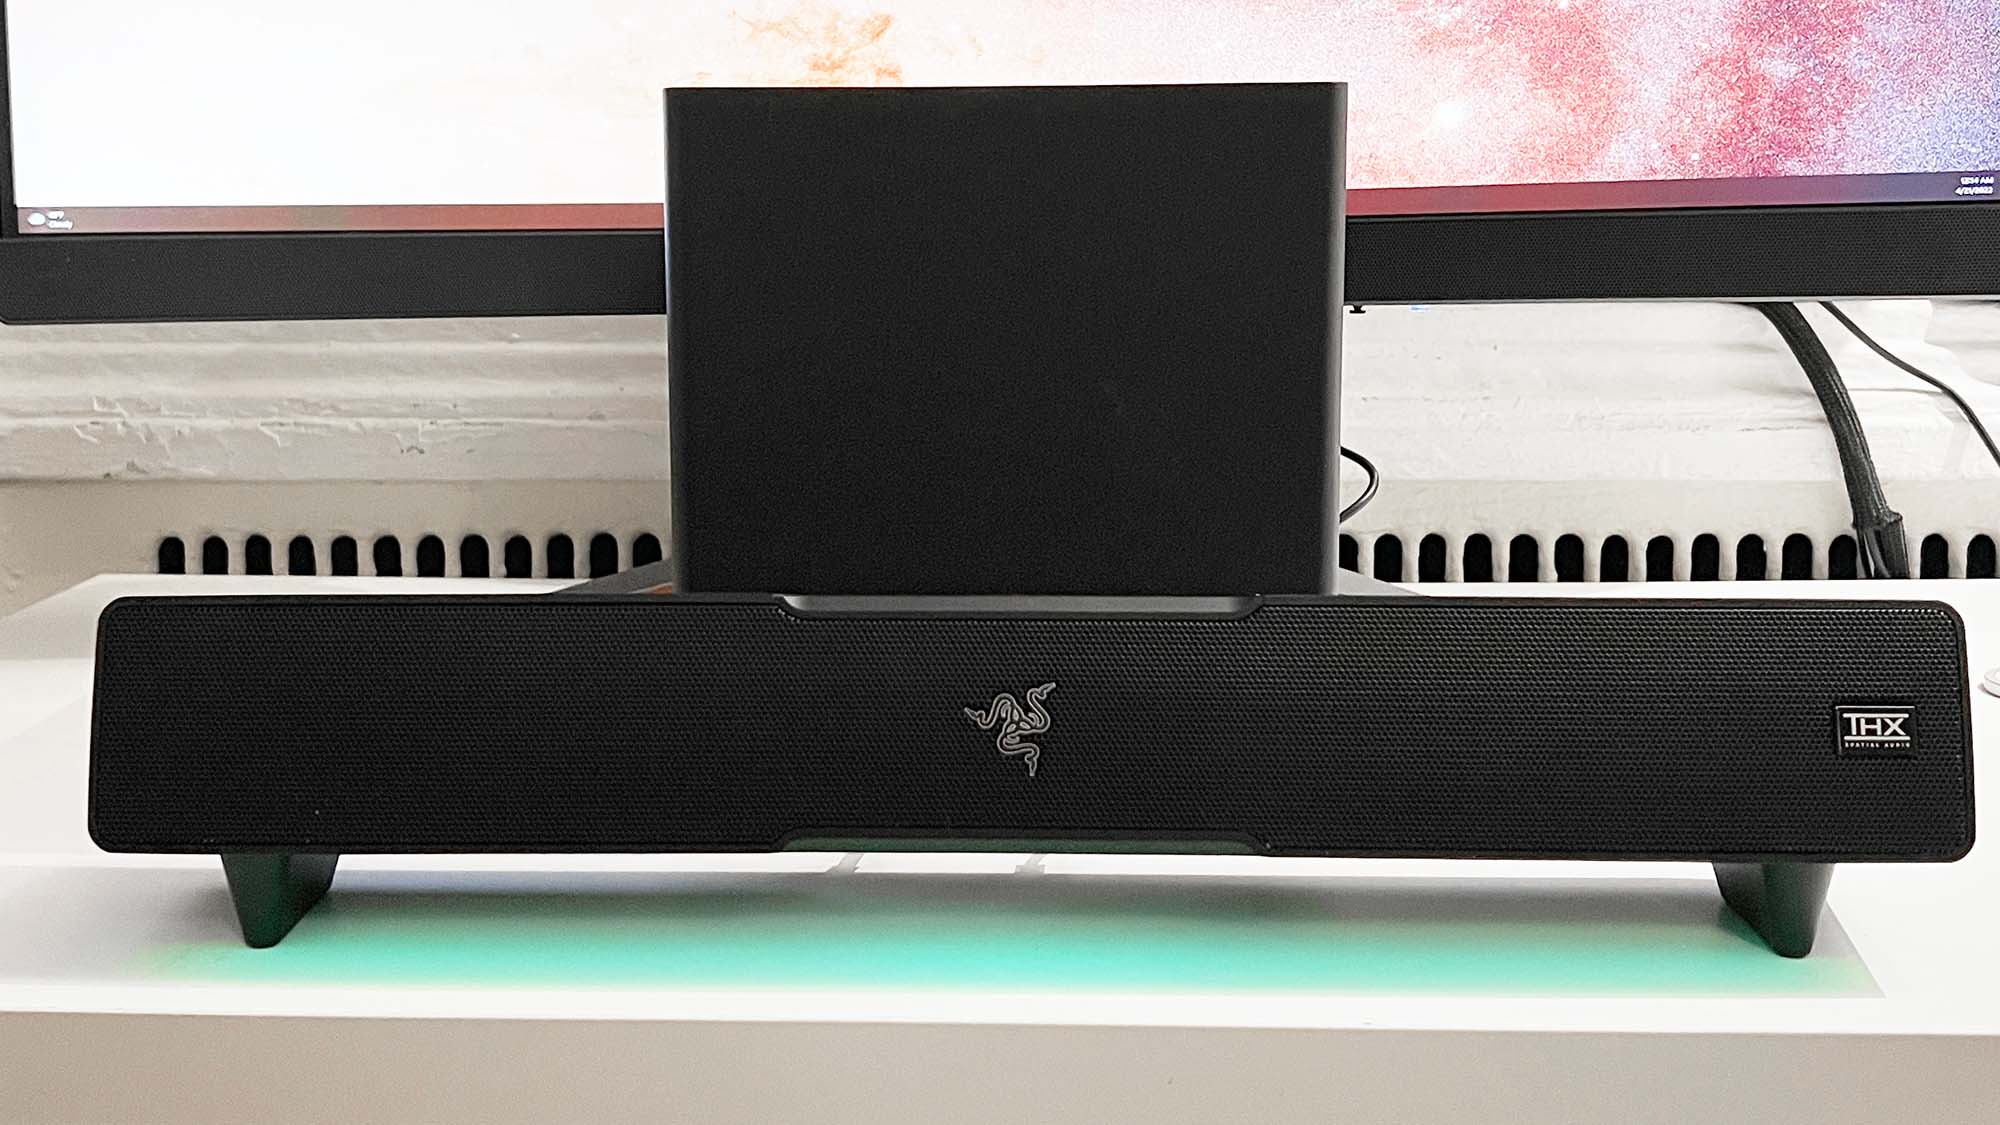 A Razer Leviathan V2 on a desk in front of a monitor